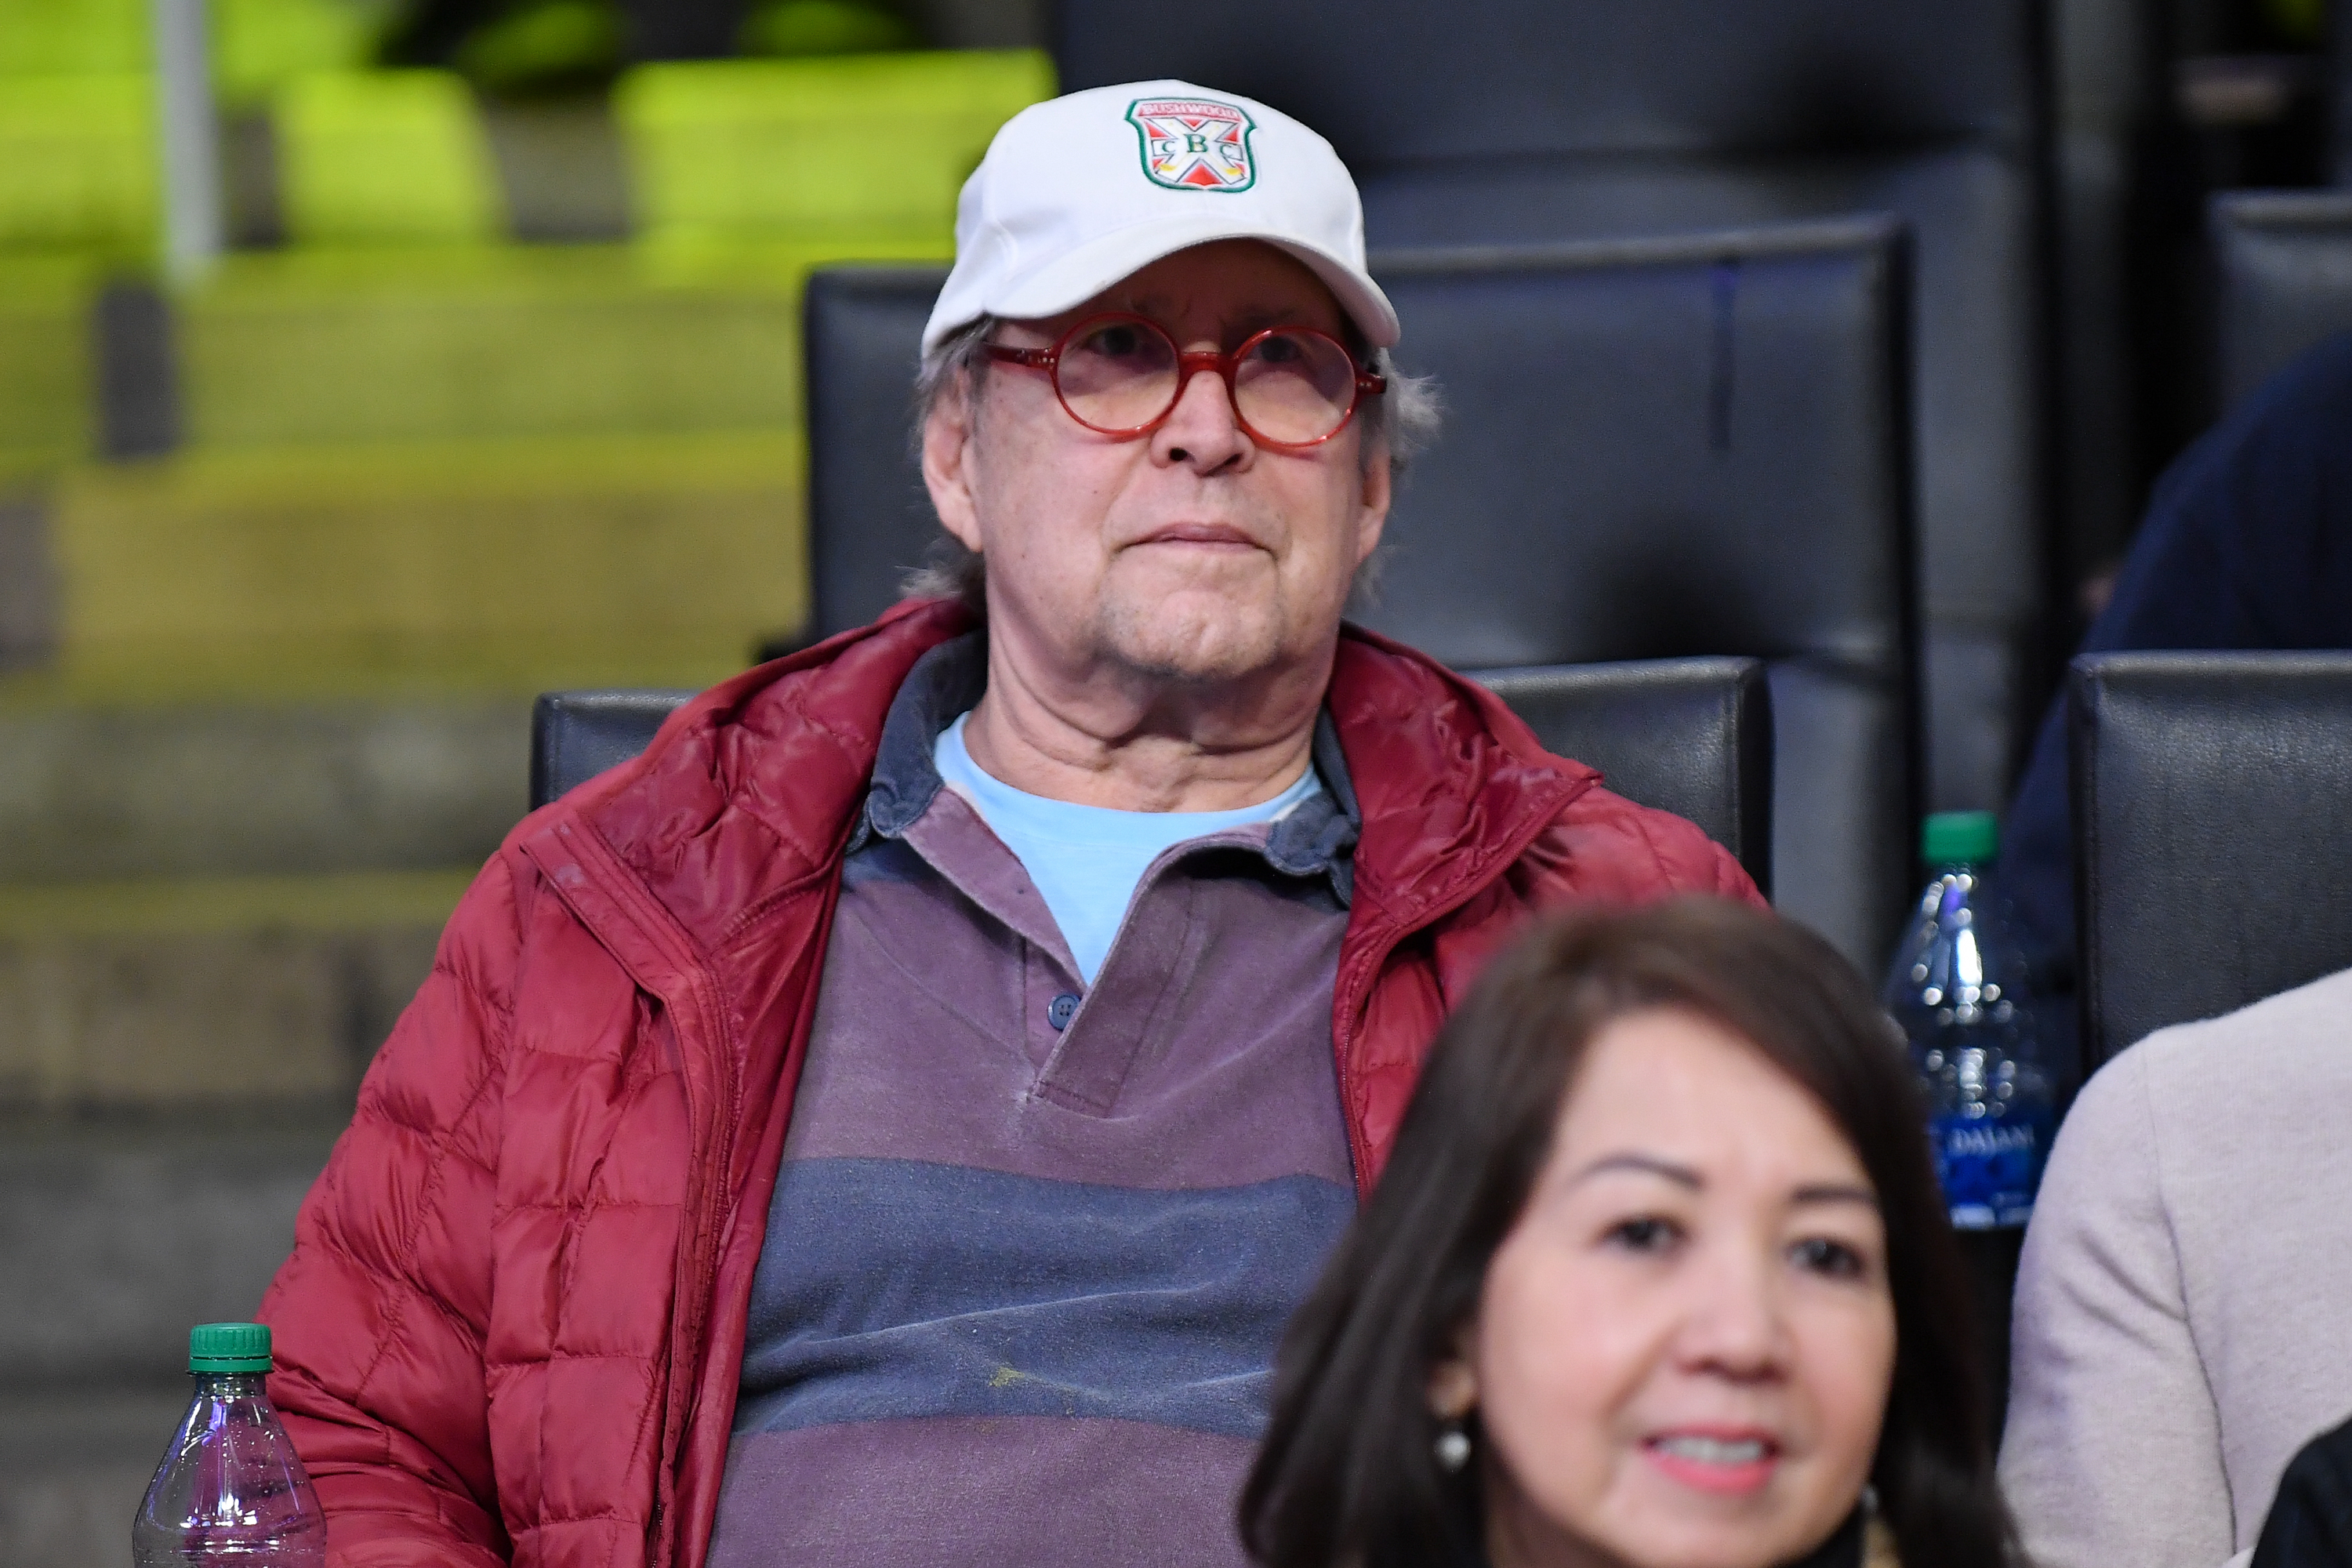 Chevy Chase at an event, wearing a white cap and glasses, with a red jacket over a blue shirt